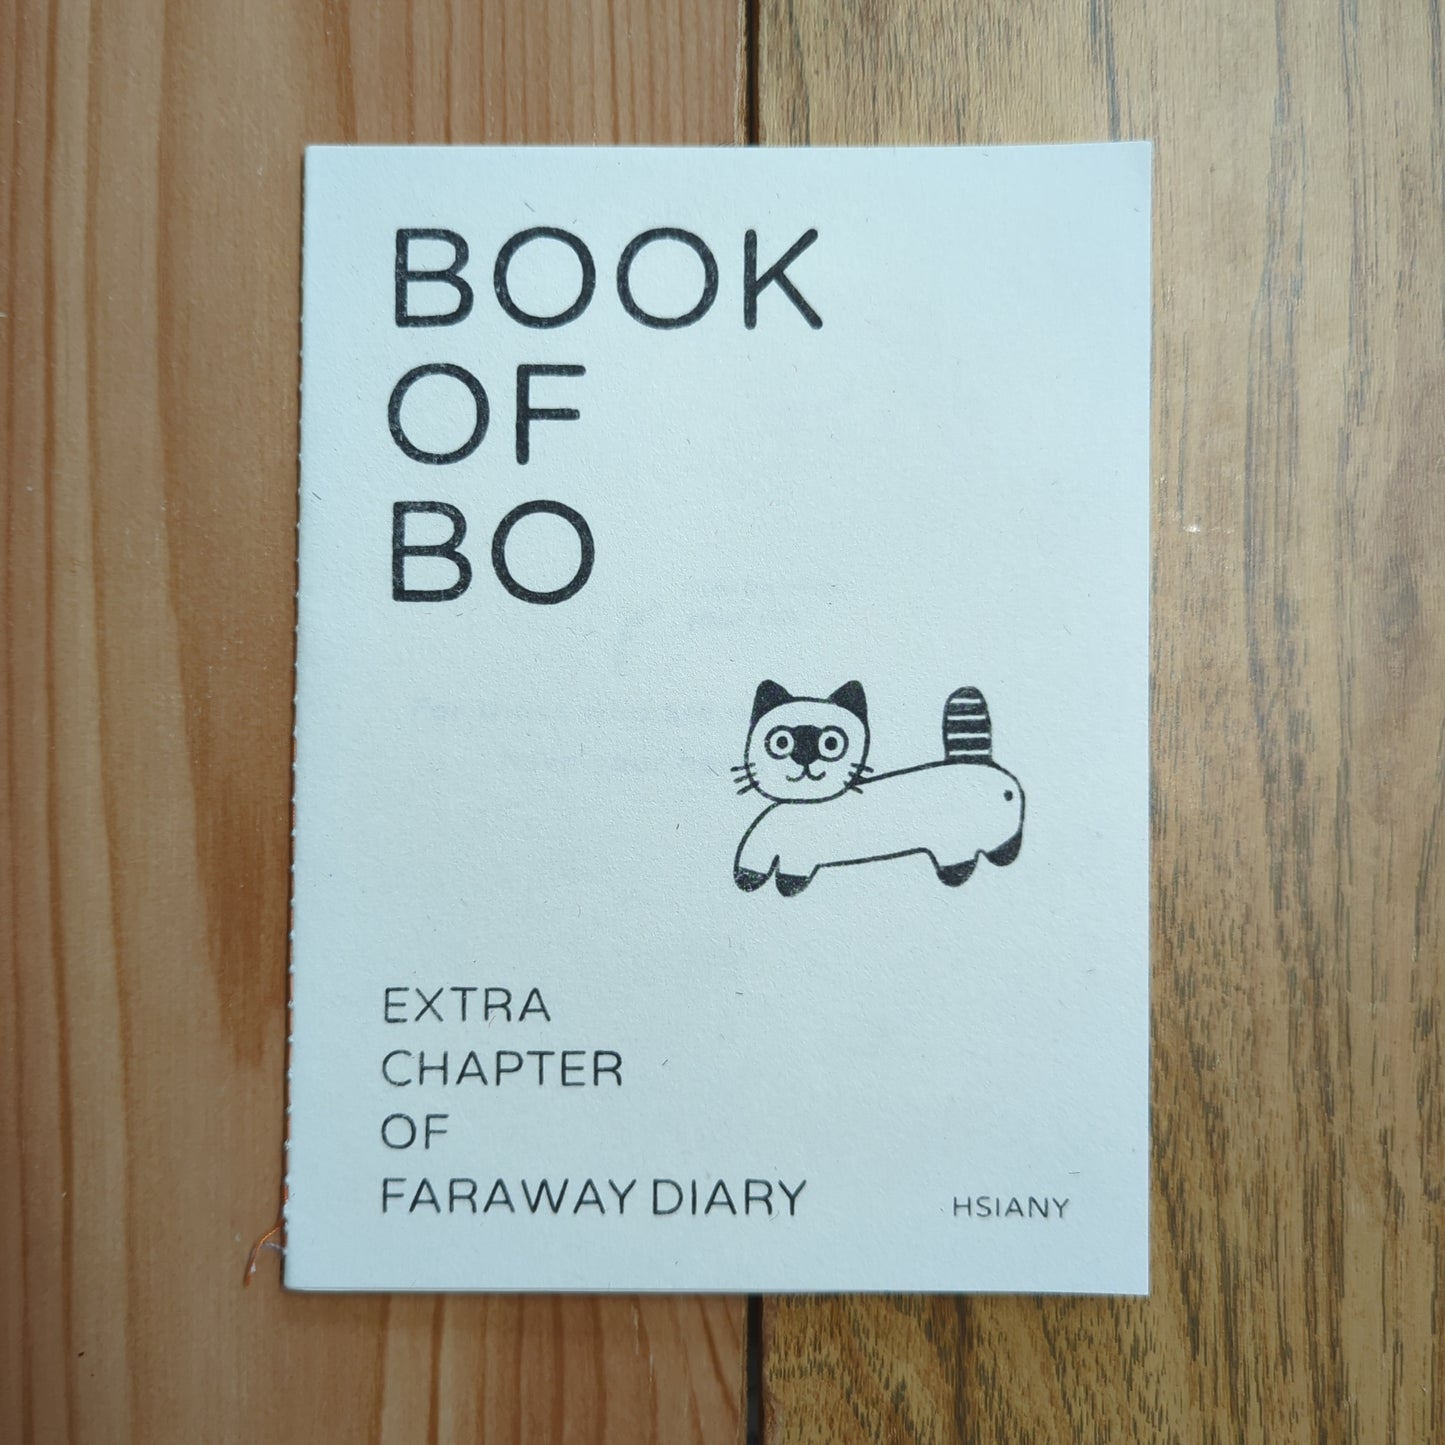 Book of Bo: Extra Chapter of Faraway Diary